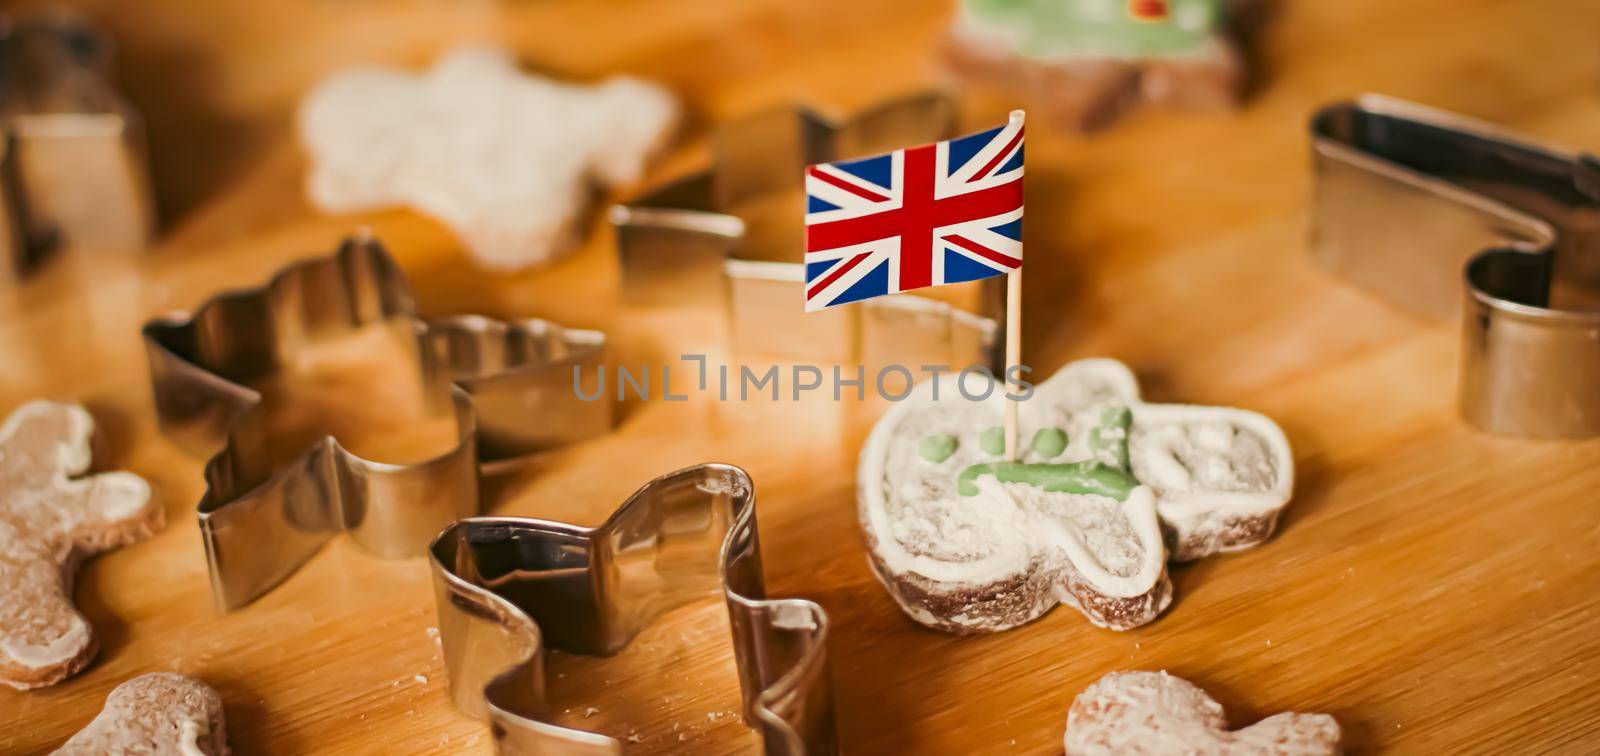 British holiday and Christmas baking concept. Union Jack flag of Great Britain and gingerbread men biscuits in the kitchen in England.